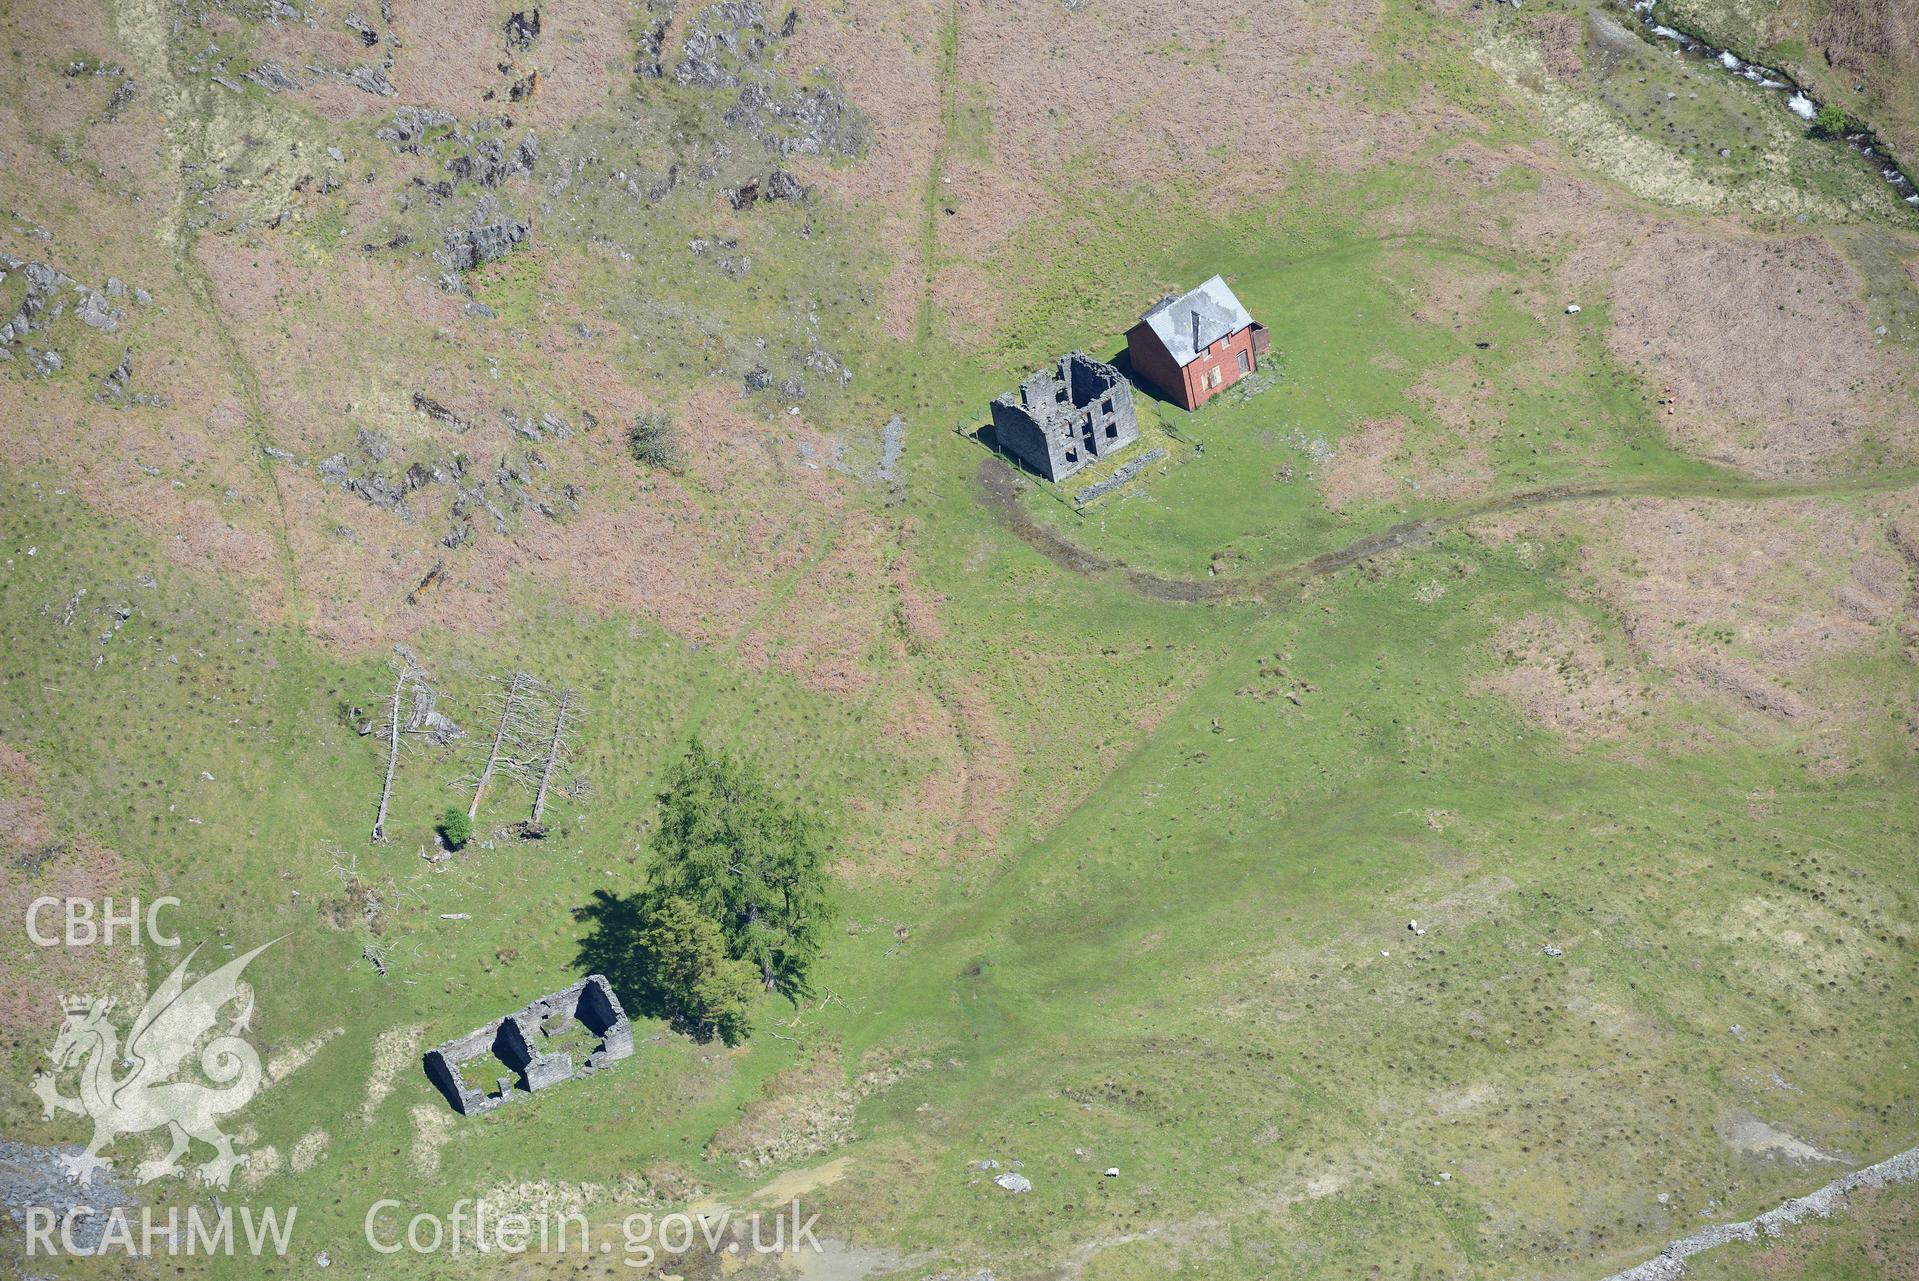 Cwm Elan lead mine complex, including the remains of Cwm Elan mine house, and Pengwaidd house and office. Oblique aerial photograph taken during the Royal Commission's programme of archaeological aerial reconnaissance by Toby Driver on 3rd June 2015.